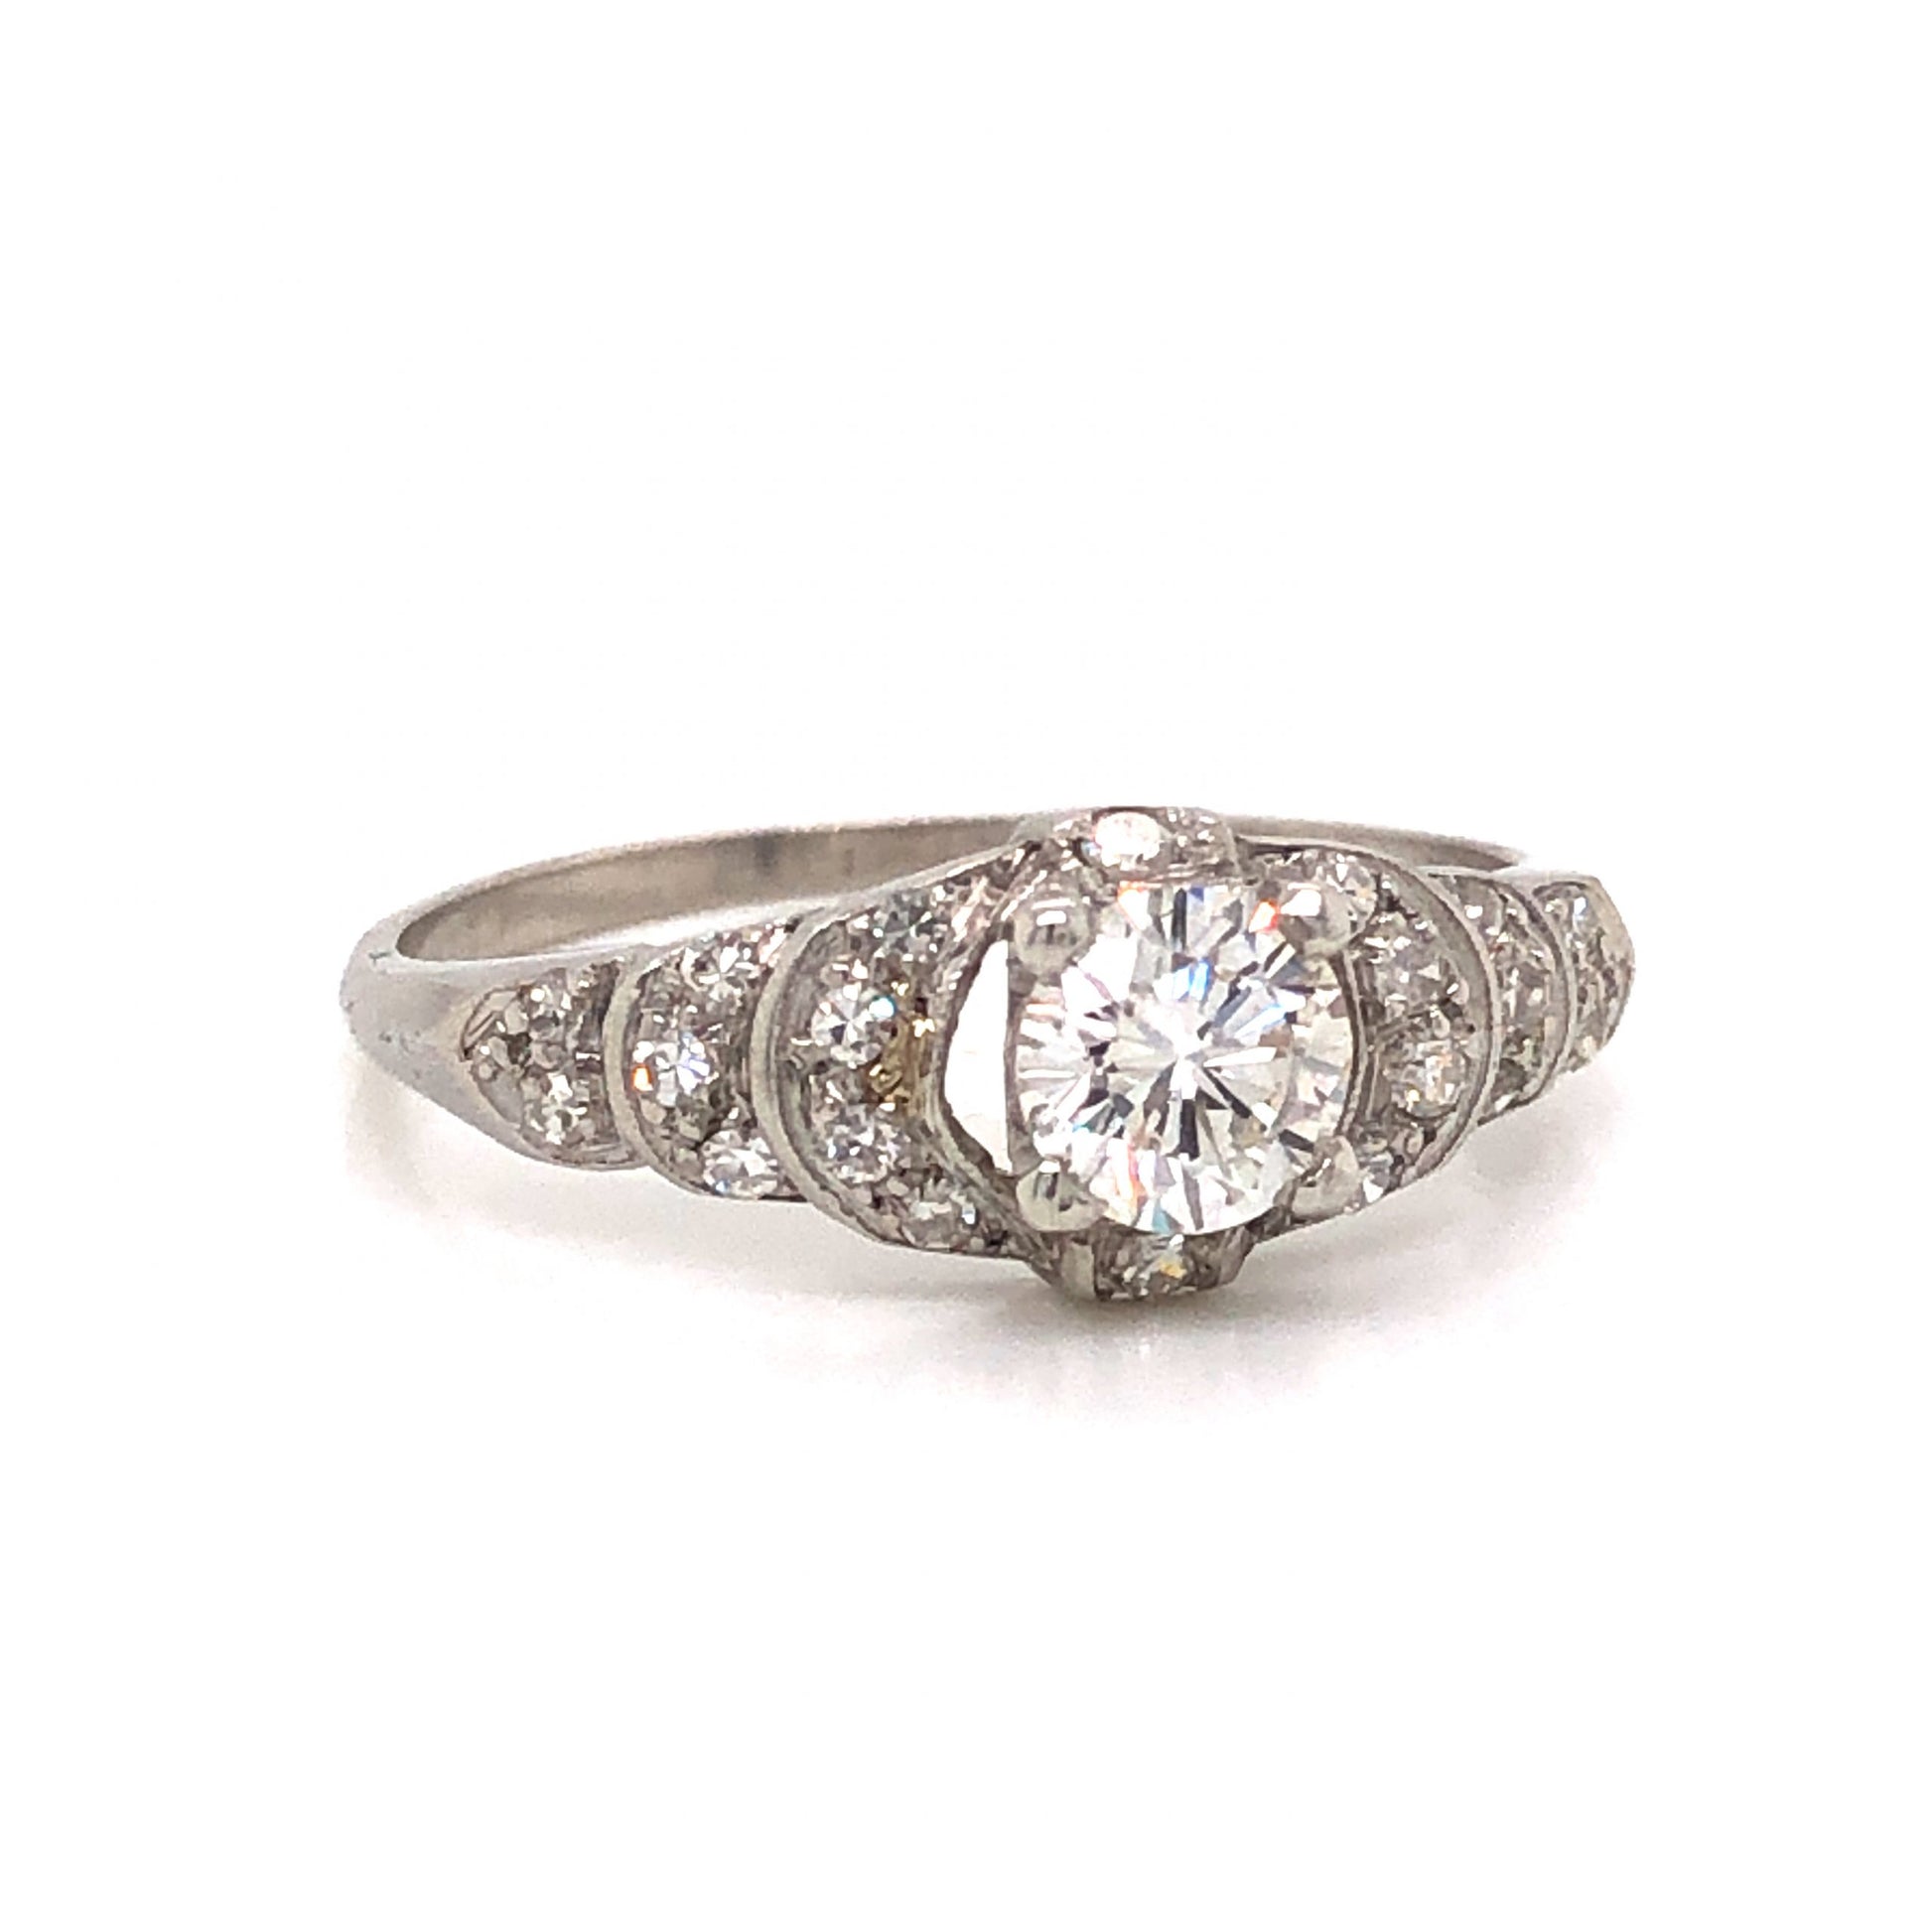 .43 Antique Art Deco Diamond Engagement Ring in PlatinumComposition: PlatinumRing Size: 7Total Diamond Weight: .58 ctTotal Gram Weight: 2.7 gInscription: 100 IRID 900 PLAT